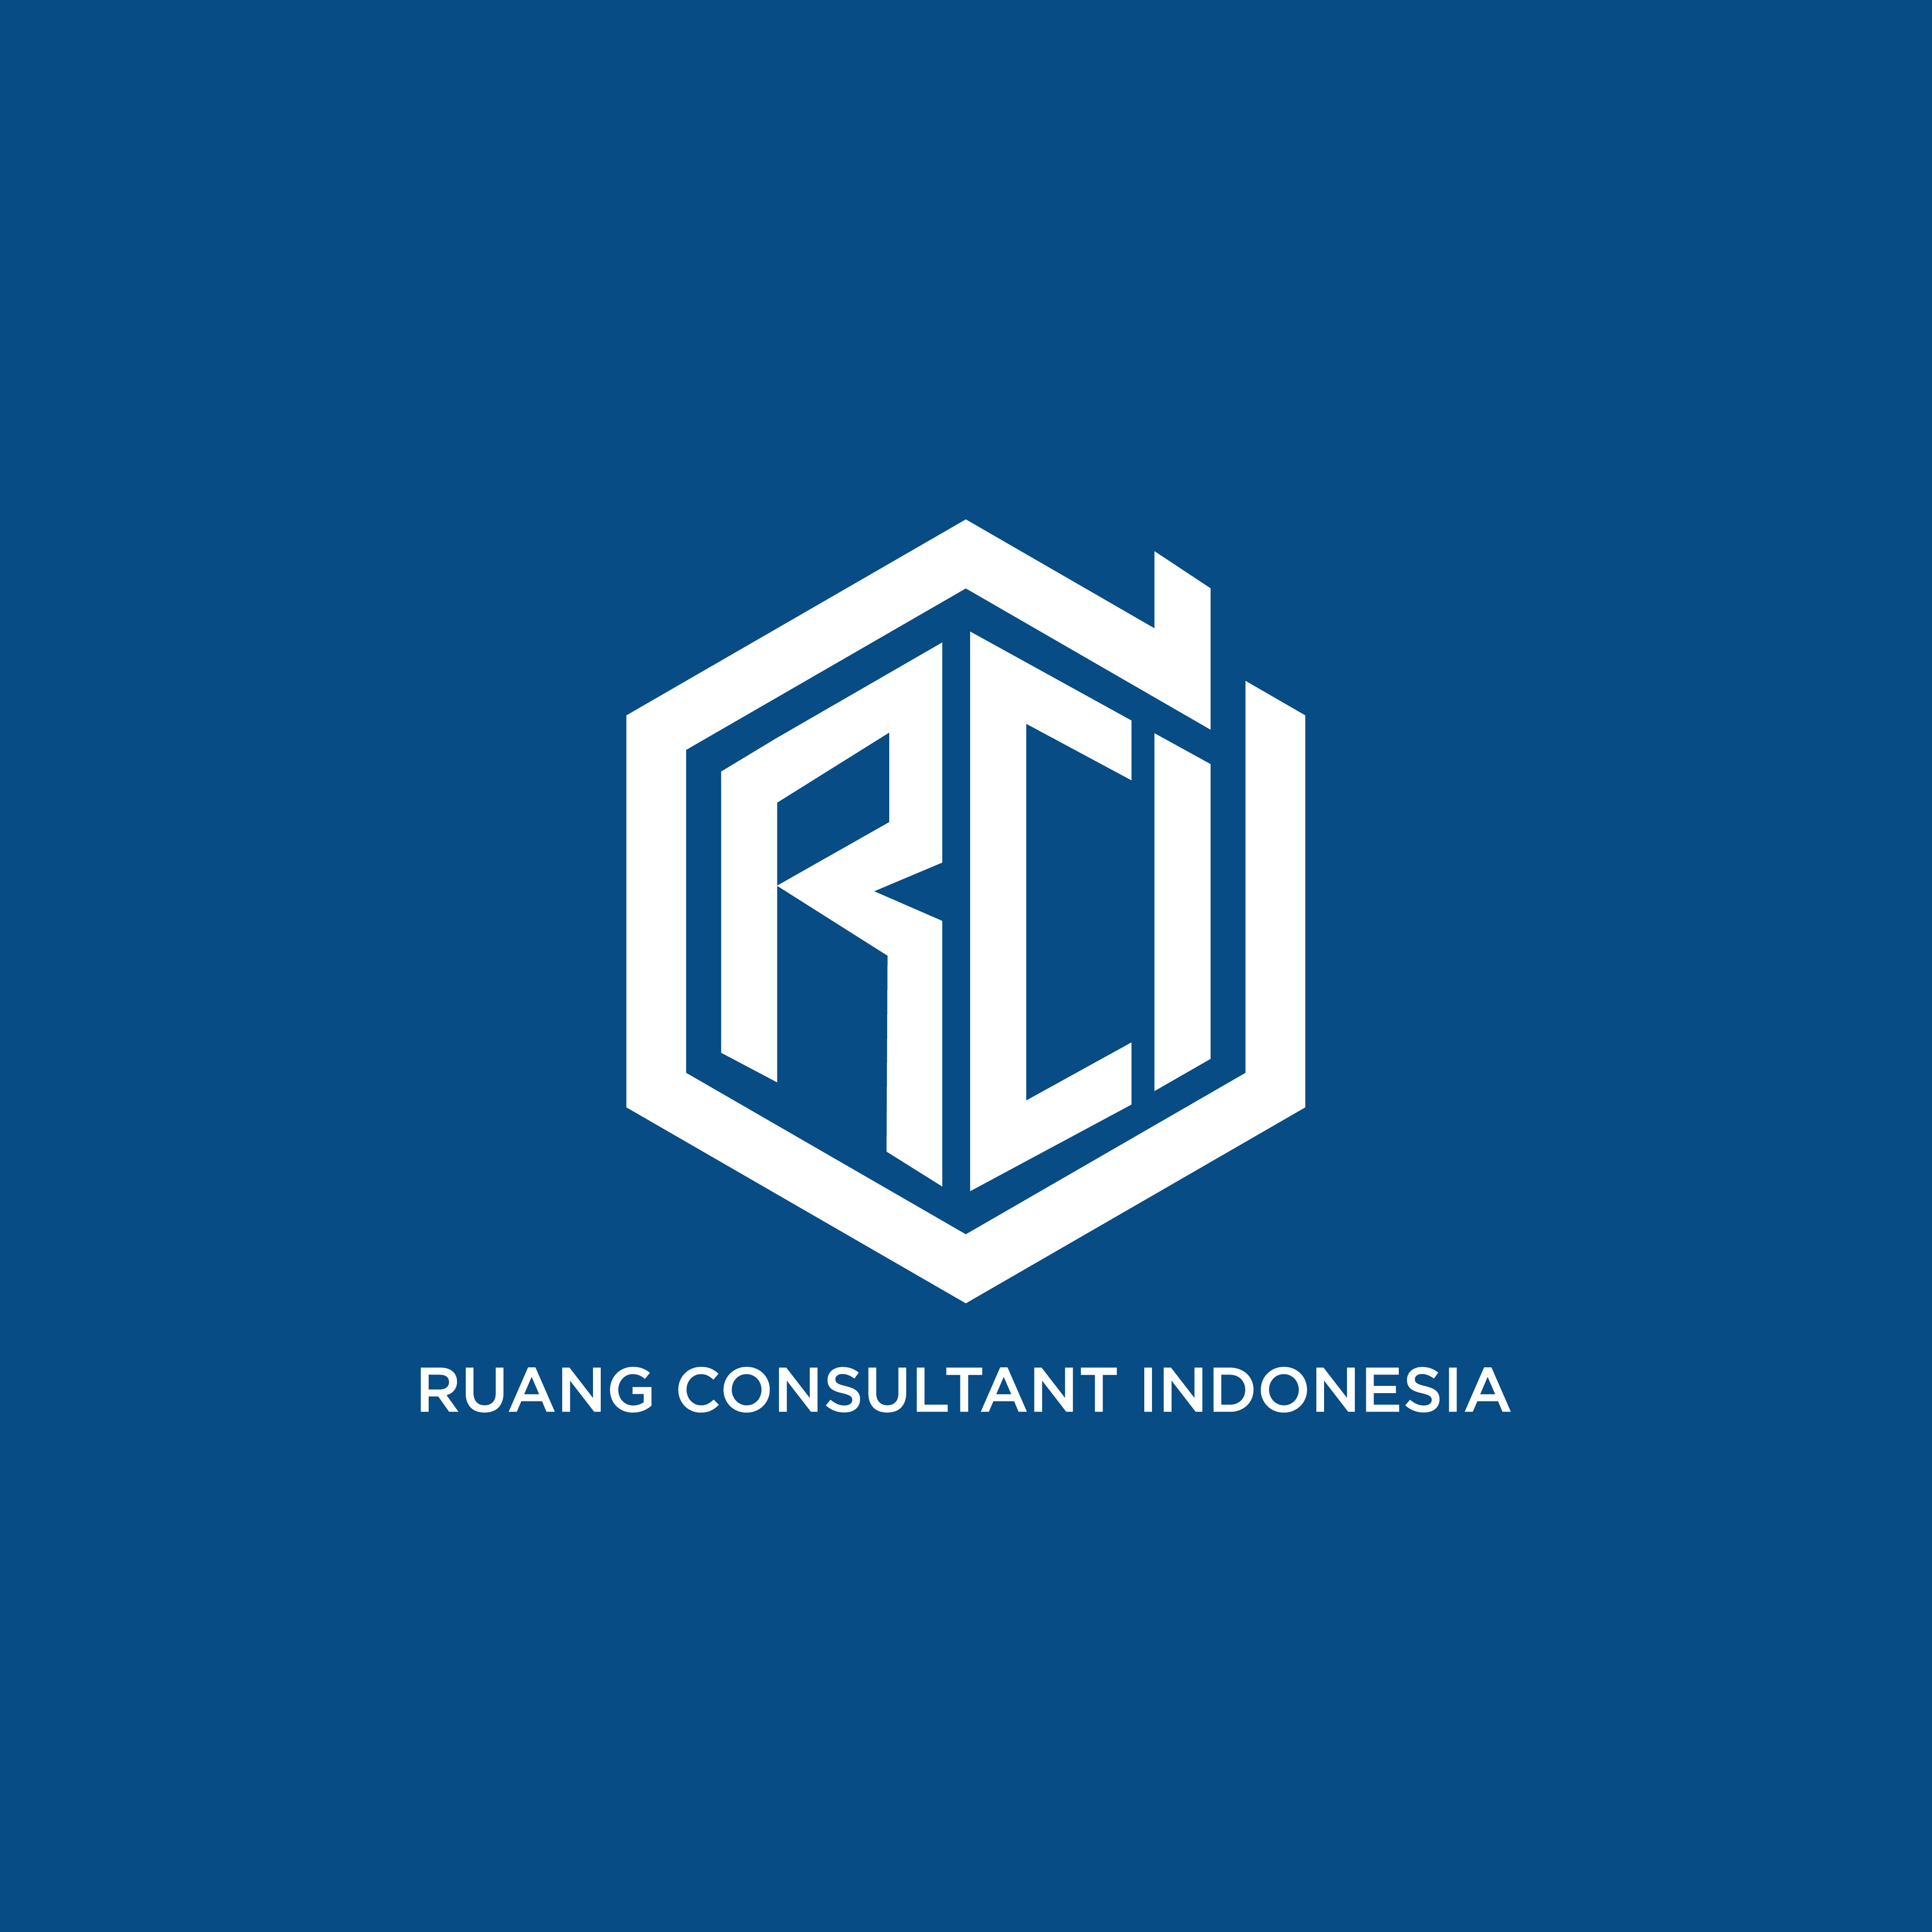 Ruang Consultant Indoesia